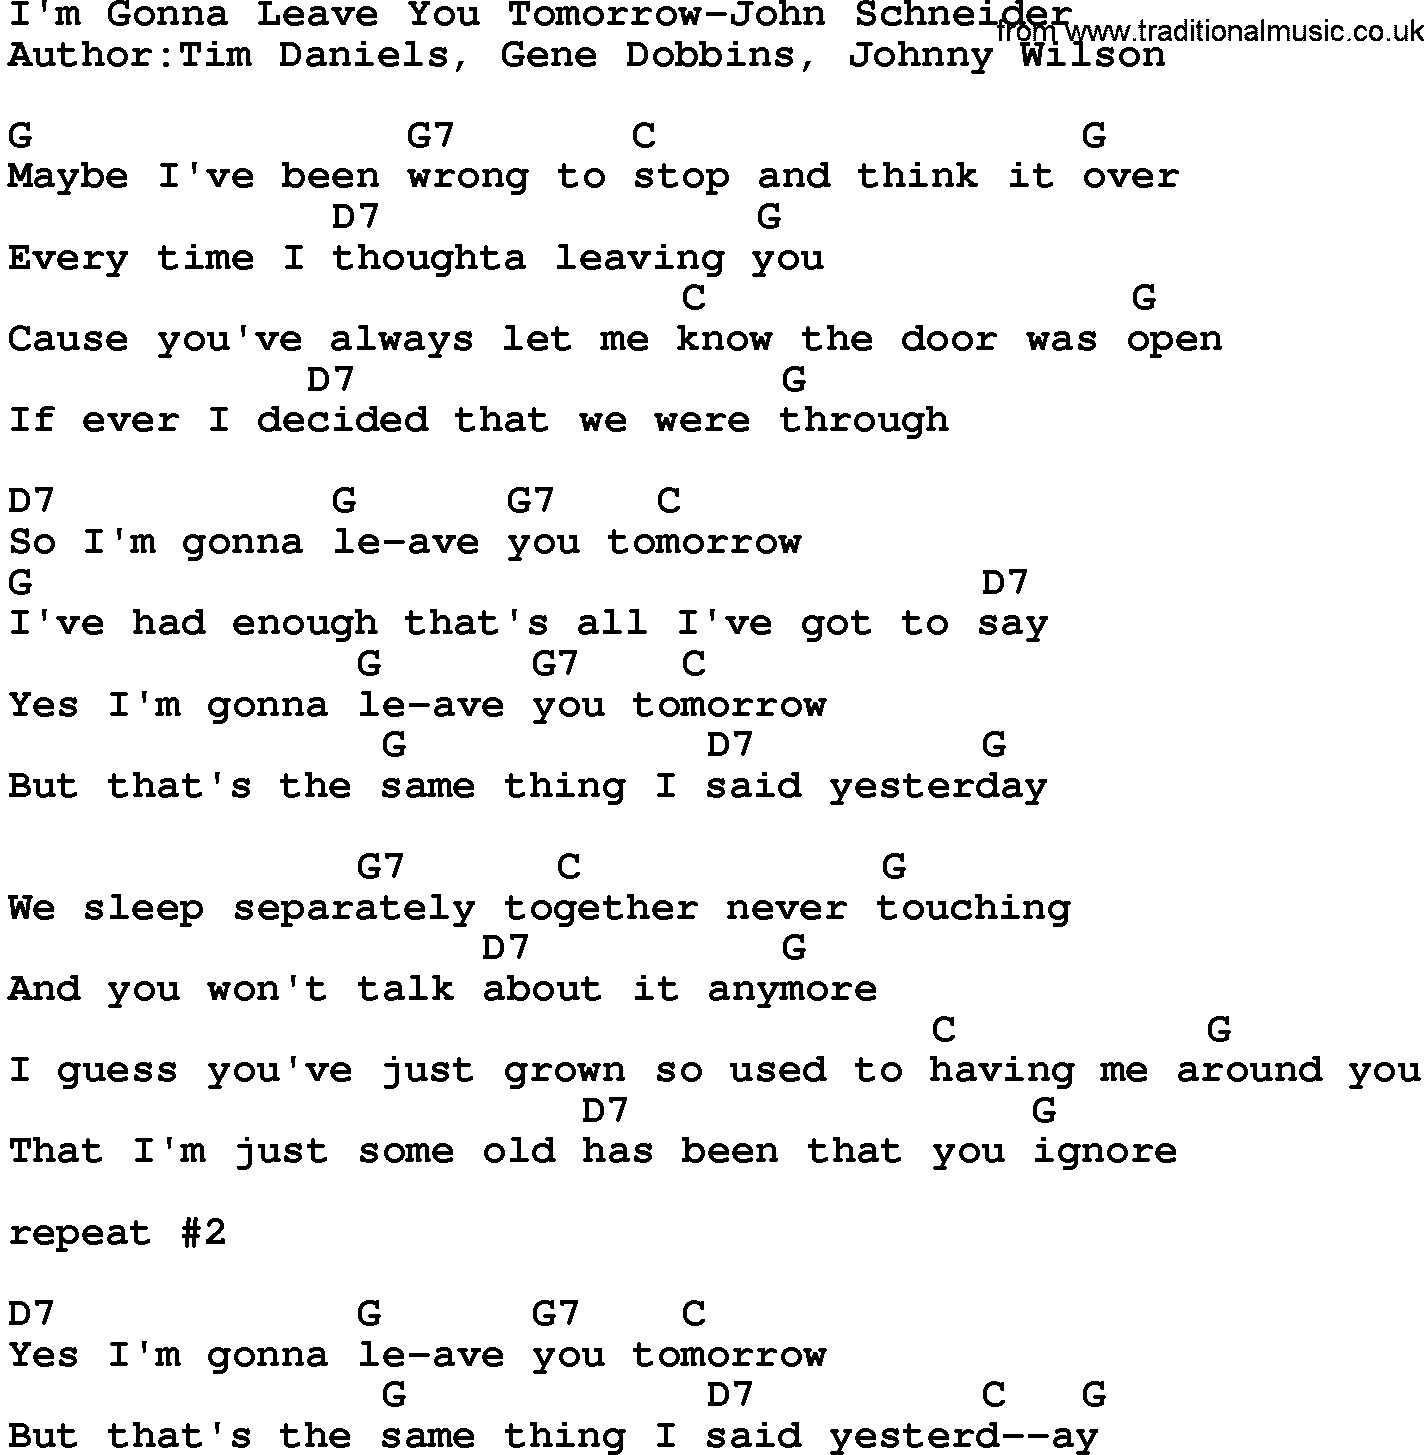 Country music song: I'm Gonna Leave You Tomorrow-John Schneider lyrics and chords